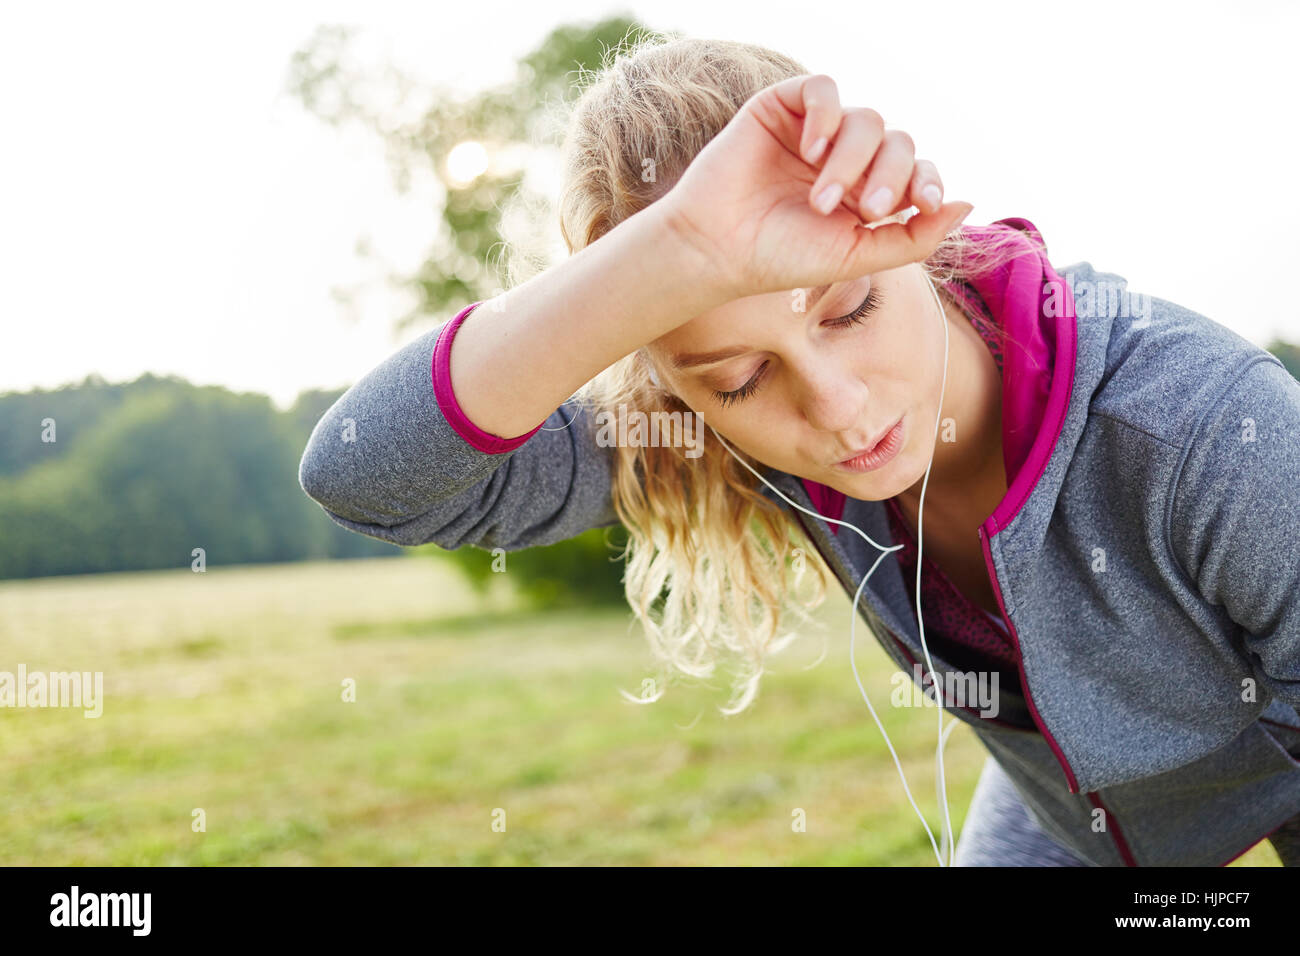 Exhausted woman after jogging catching her breath Stock Photo